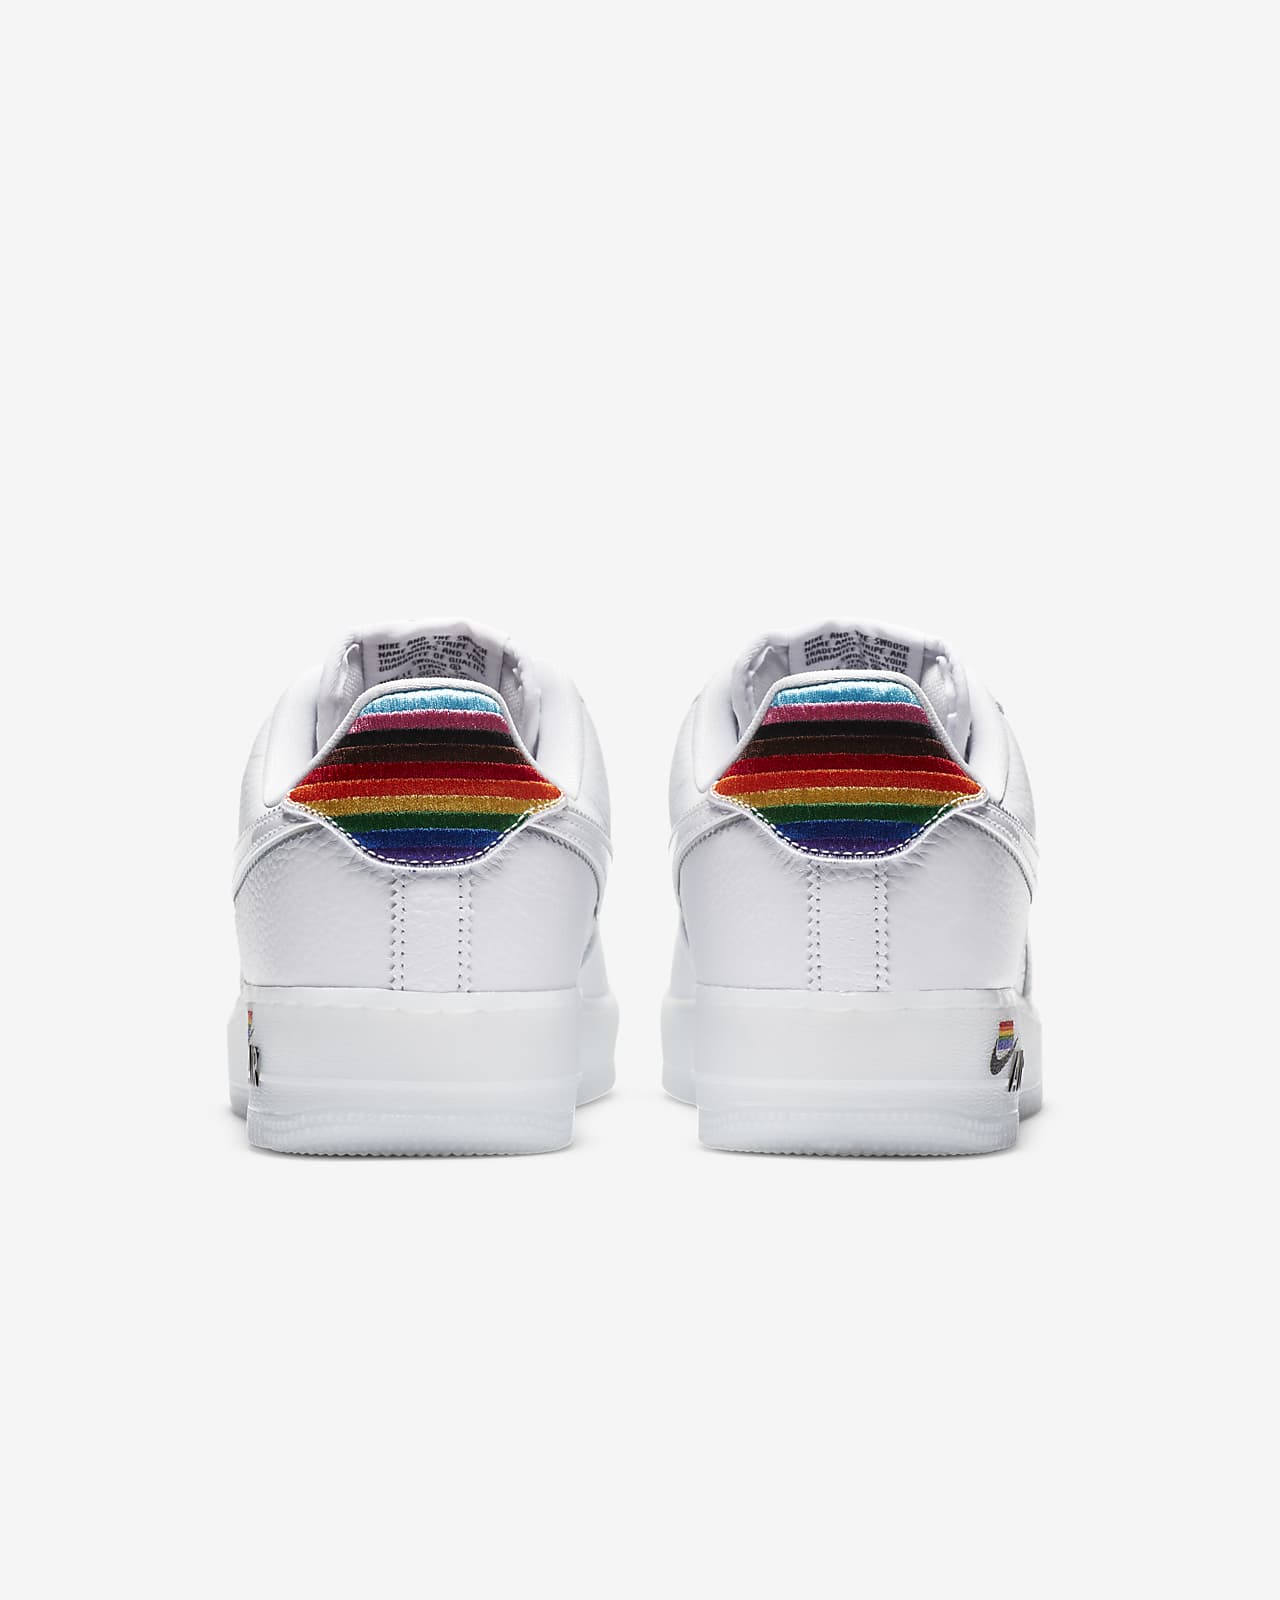 air force 1 pride shoes